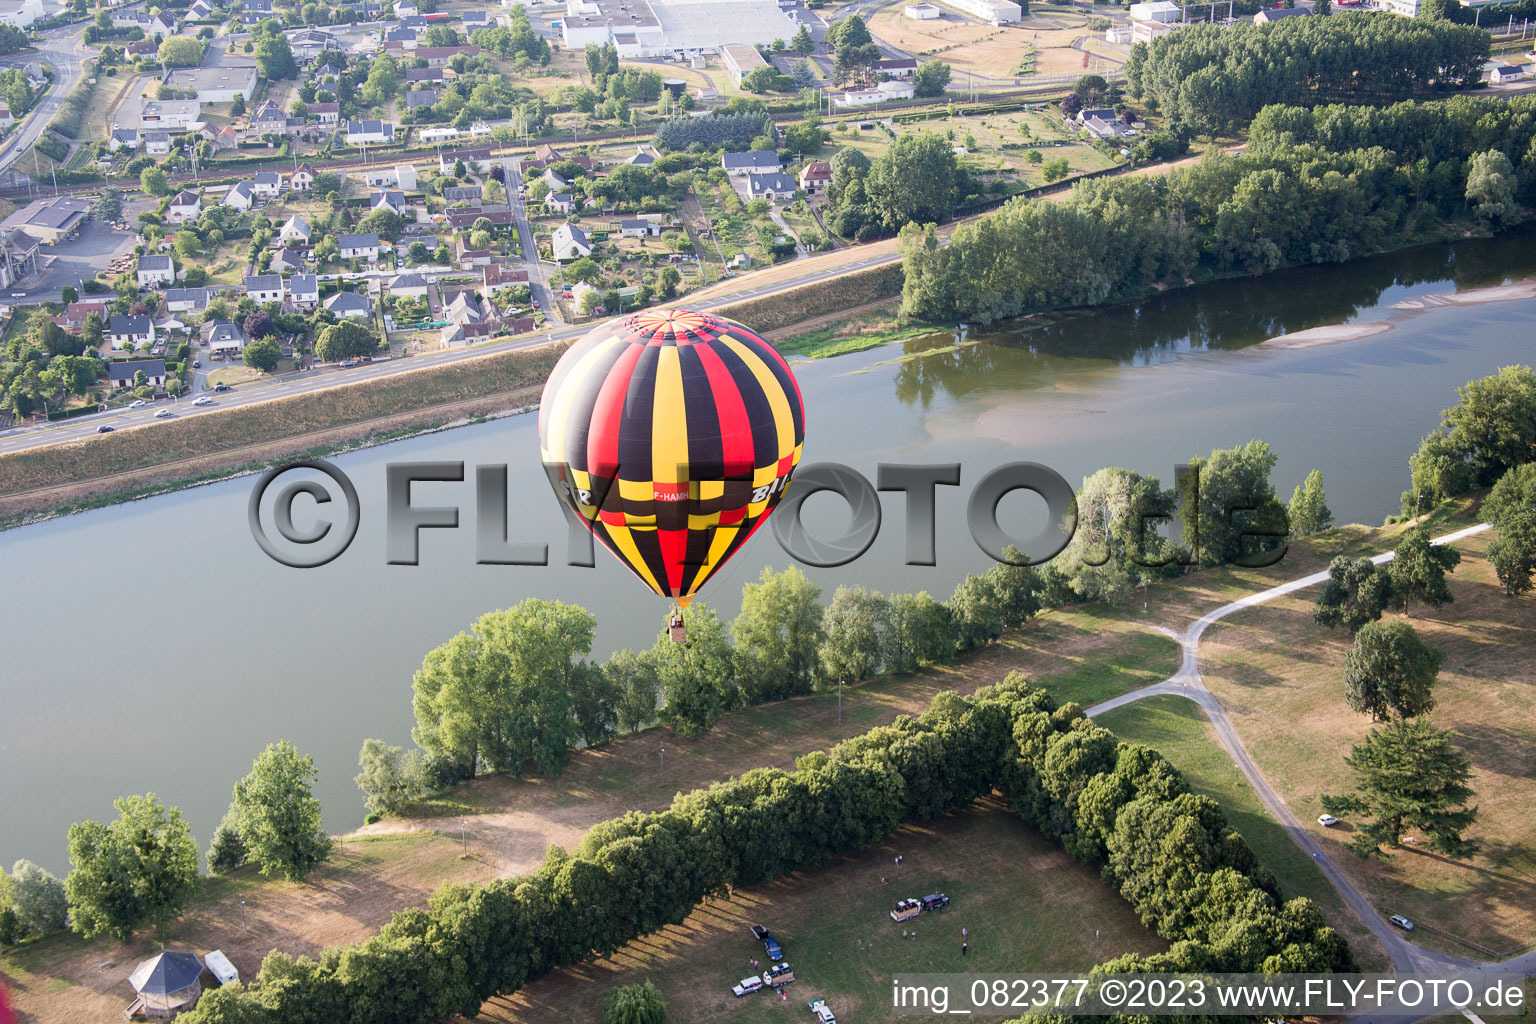 Amboise in the state Indre et Loire, France from the drone perspective